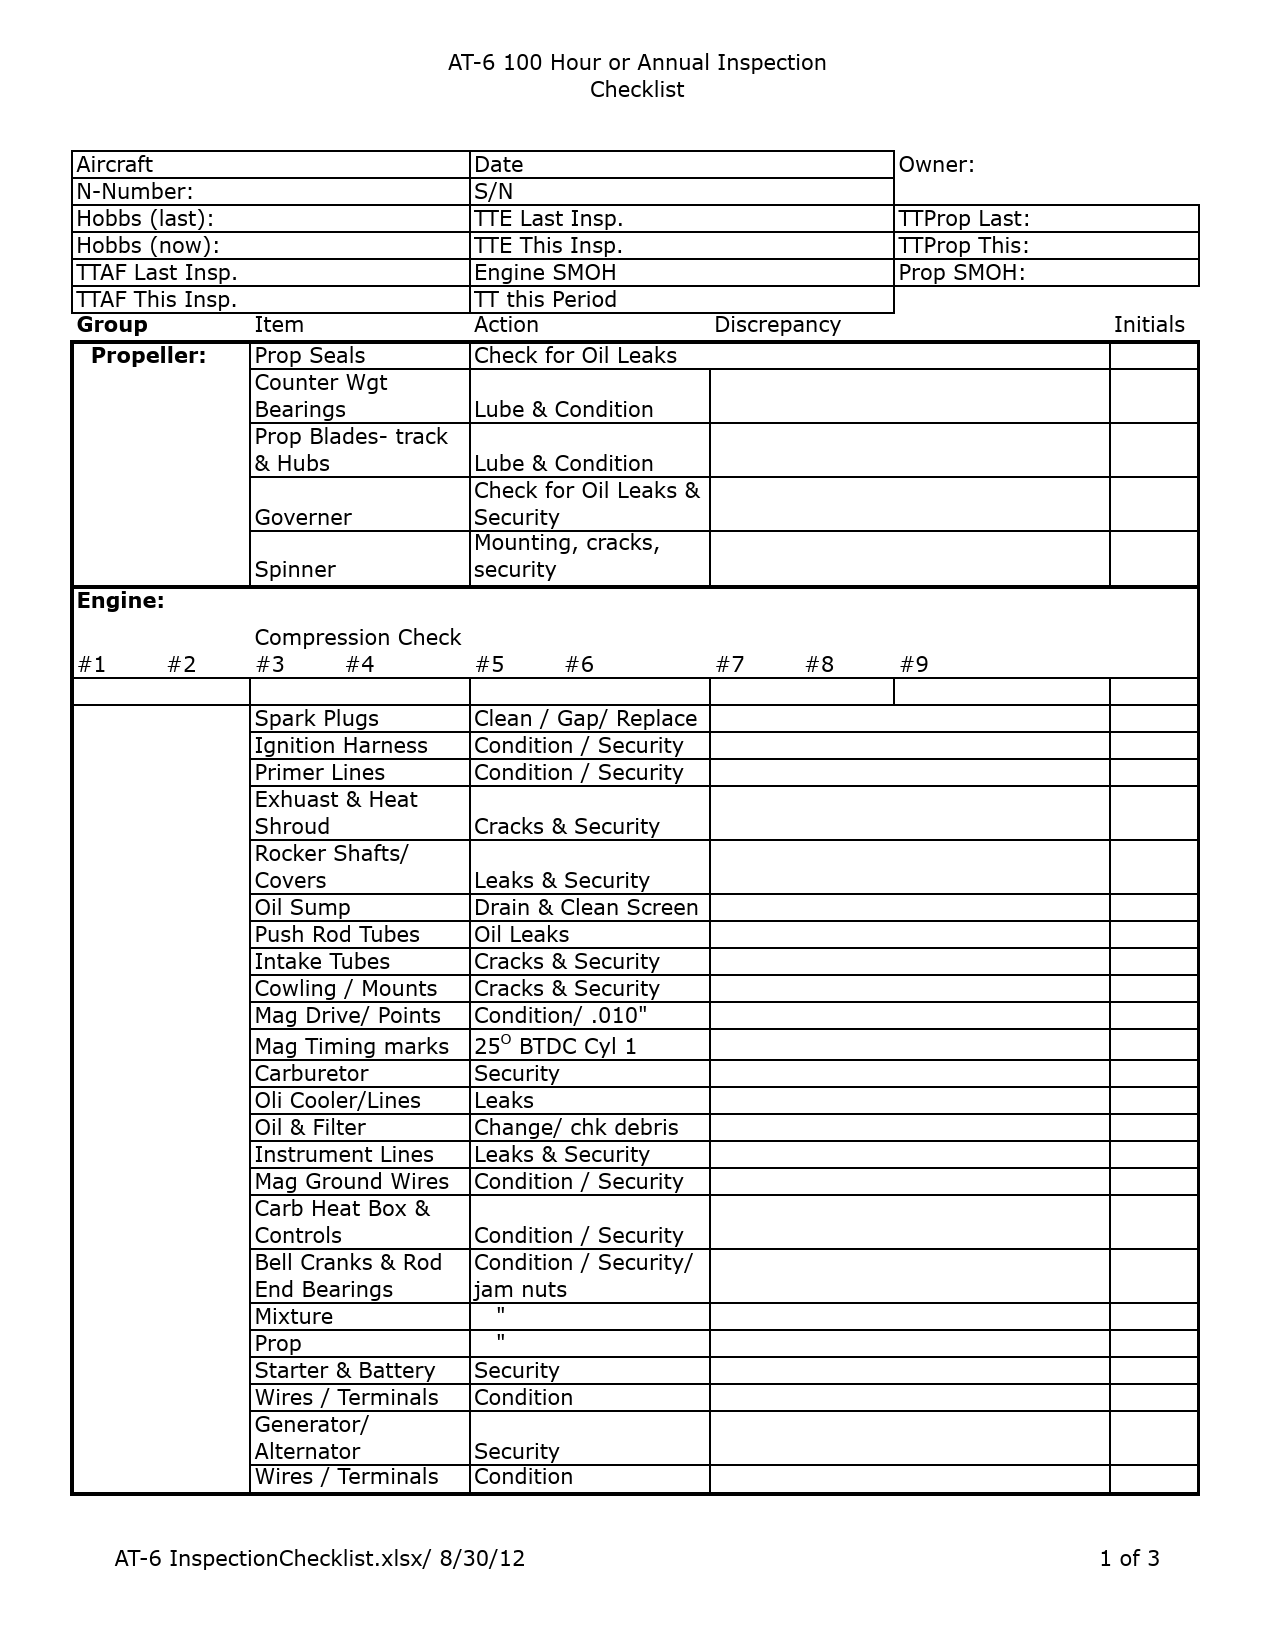 Sample page 1 from AirCorps Library document: AT-6 100 Hour or Annual Inspection Checklist  -  MASTER FORM